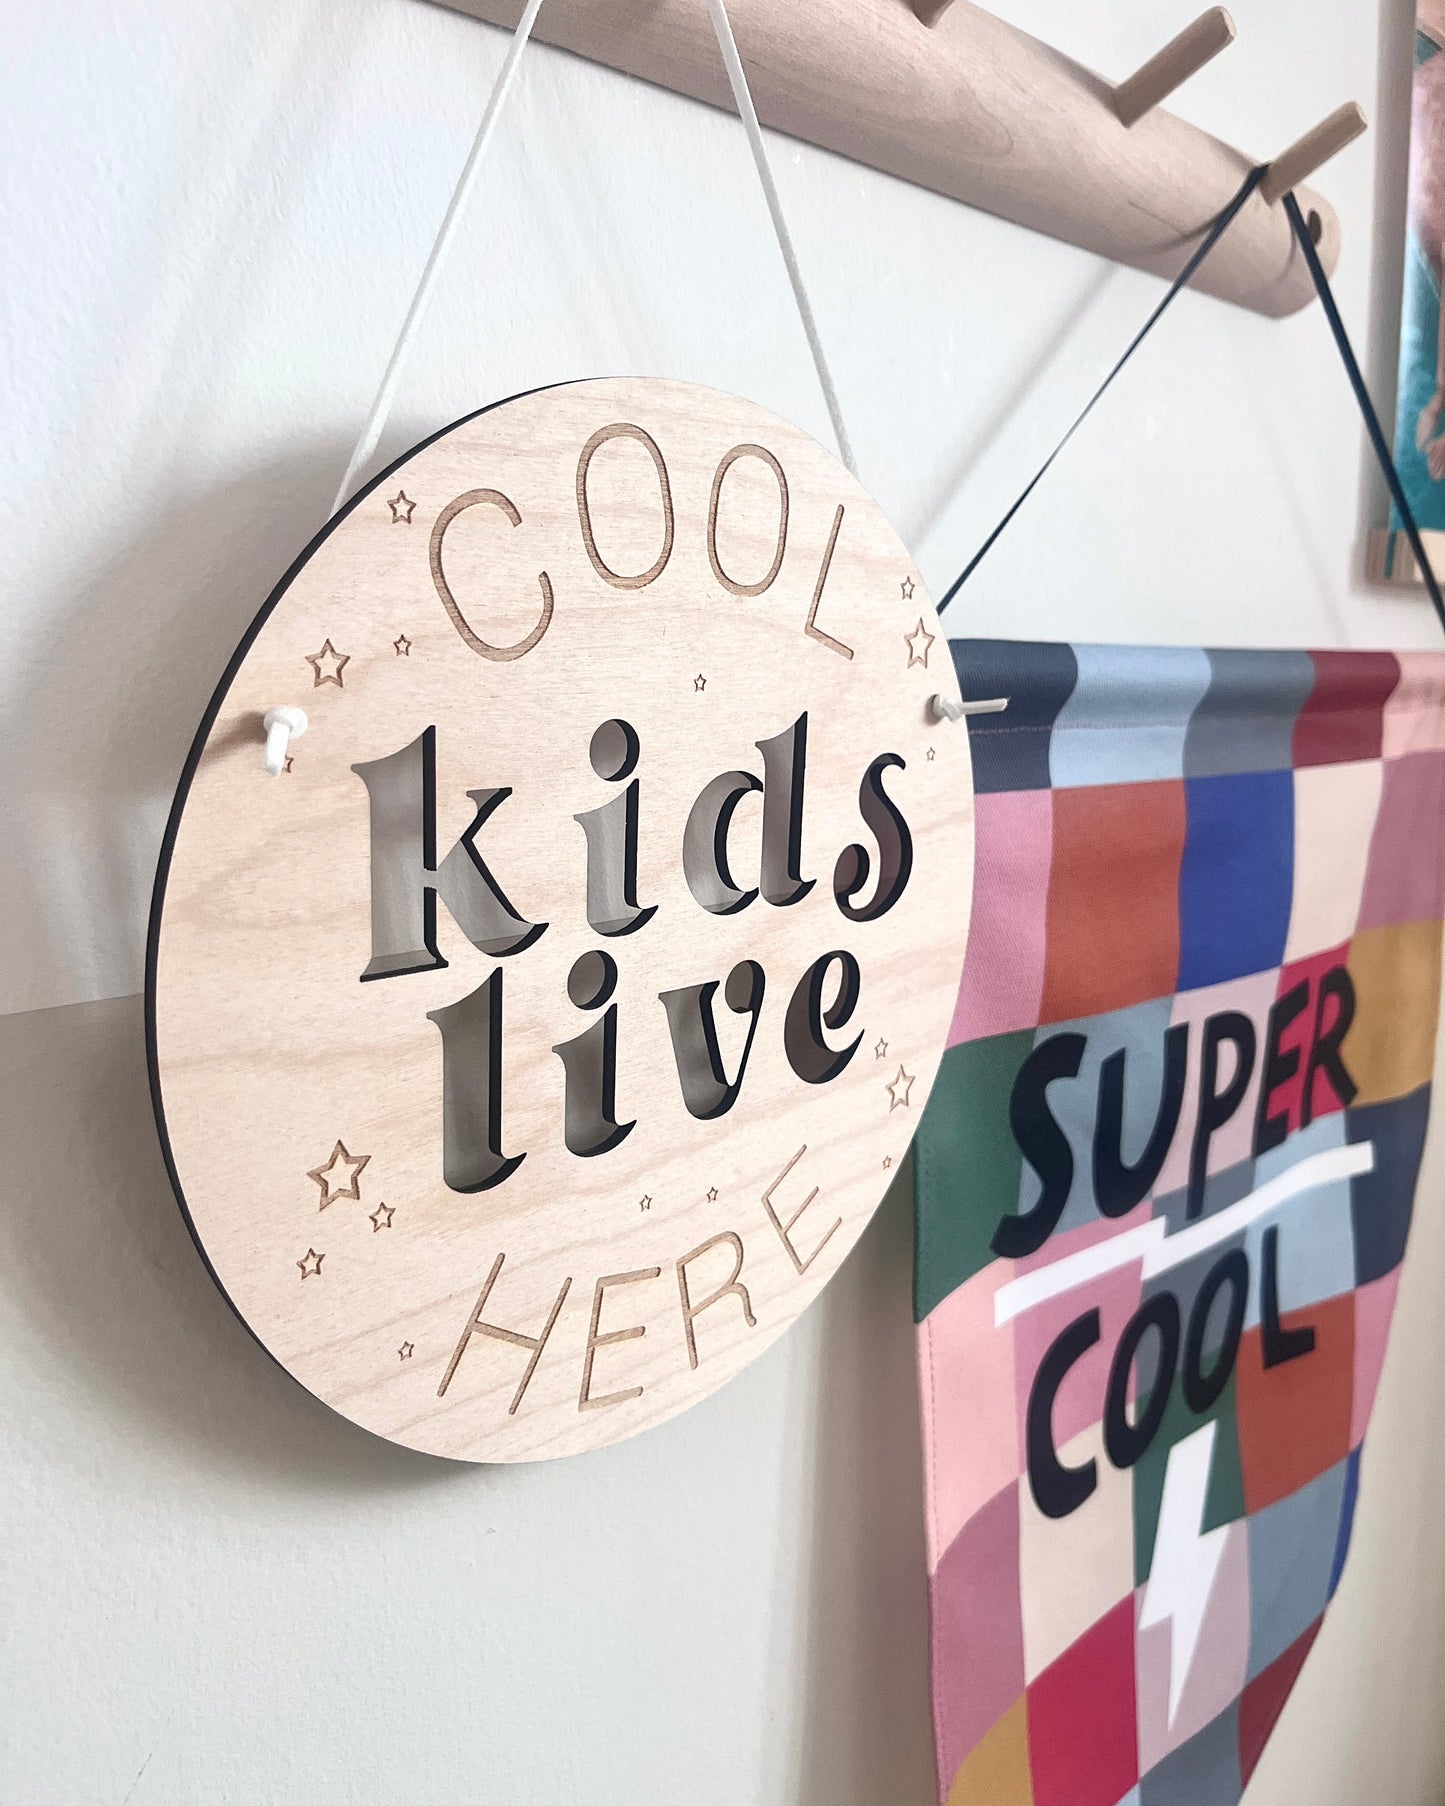 Cool kids live here sign